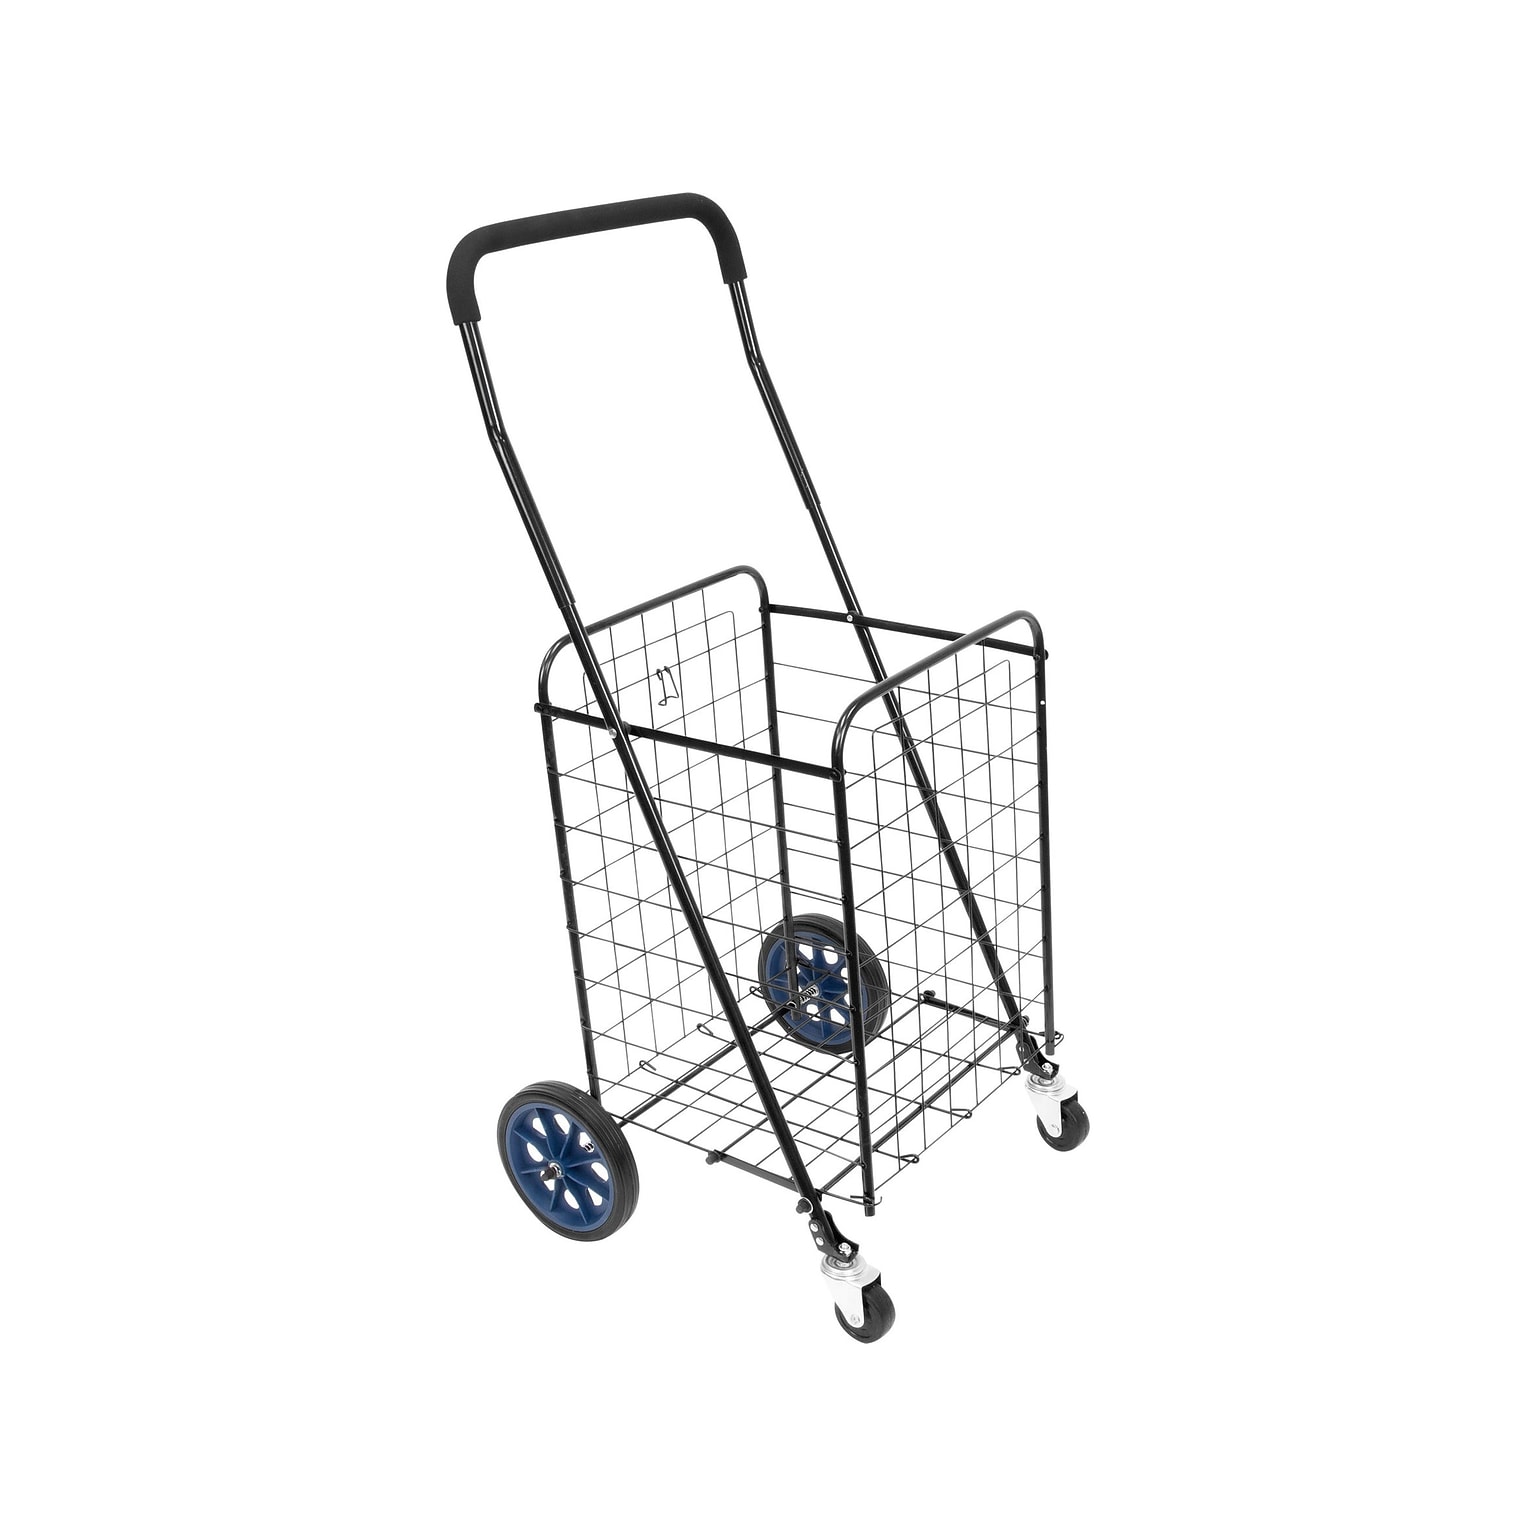 Mount-It! Small Rolling Utility Shopping Cart, 66 Lbs., Black (MI-907S)